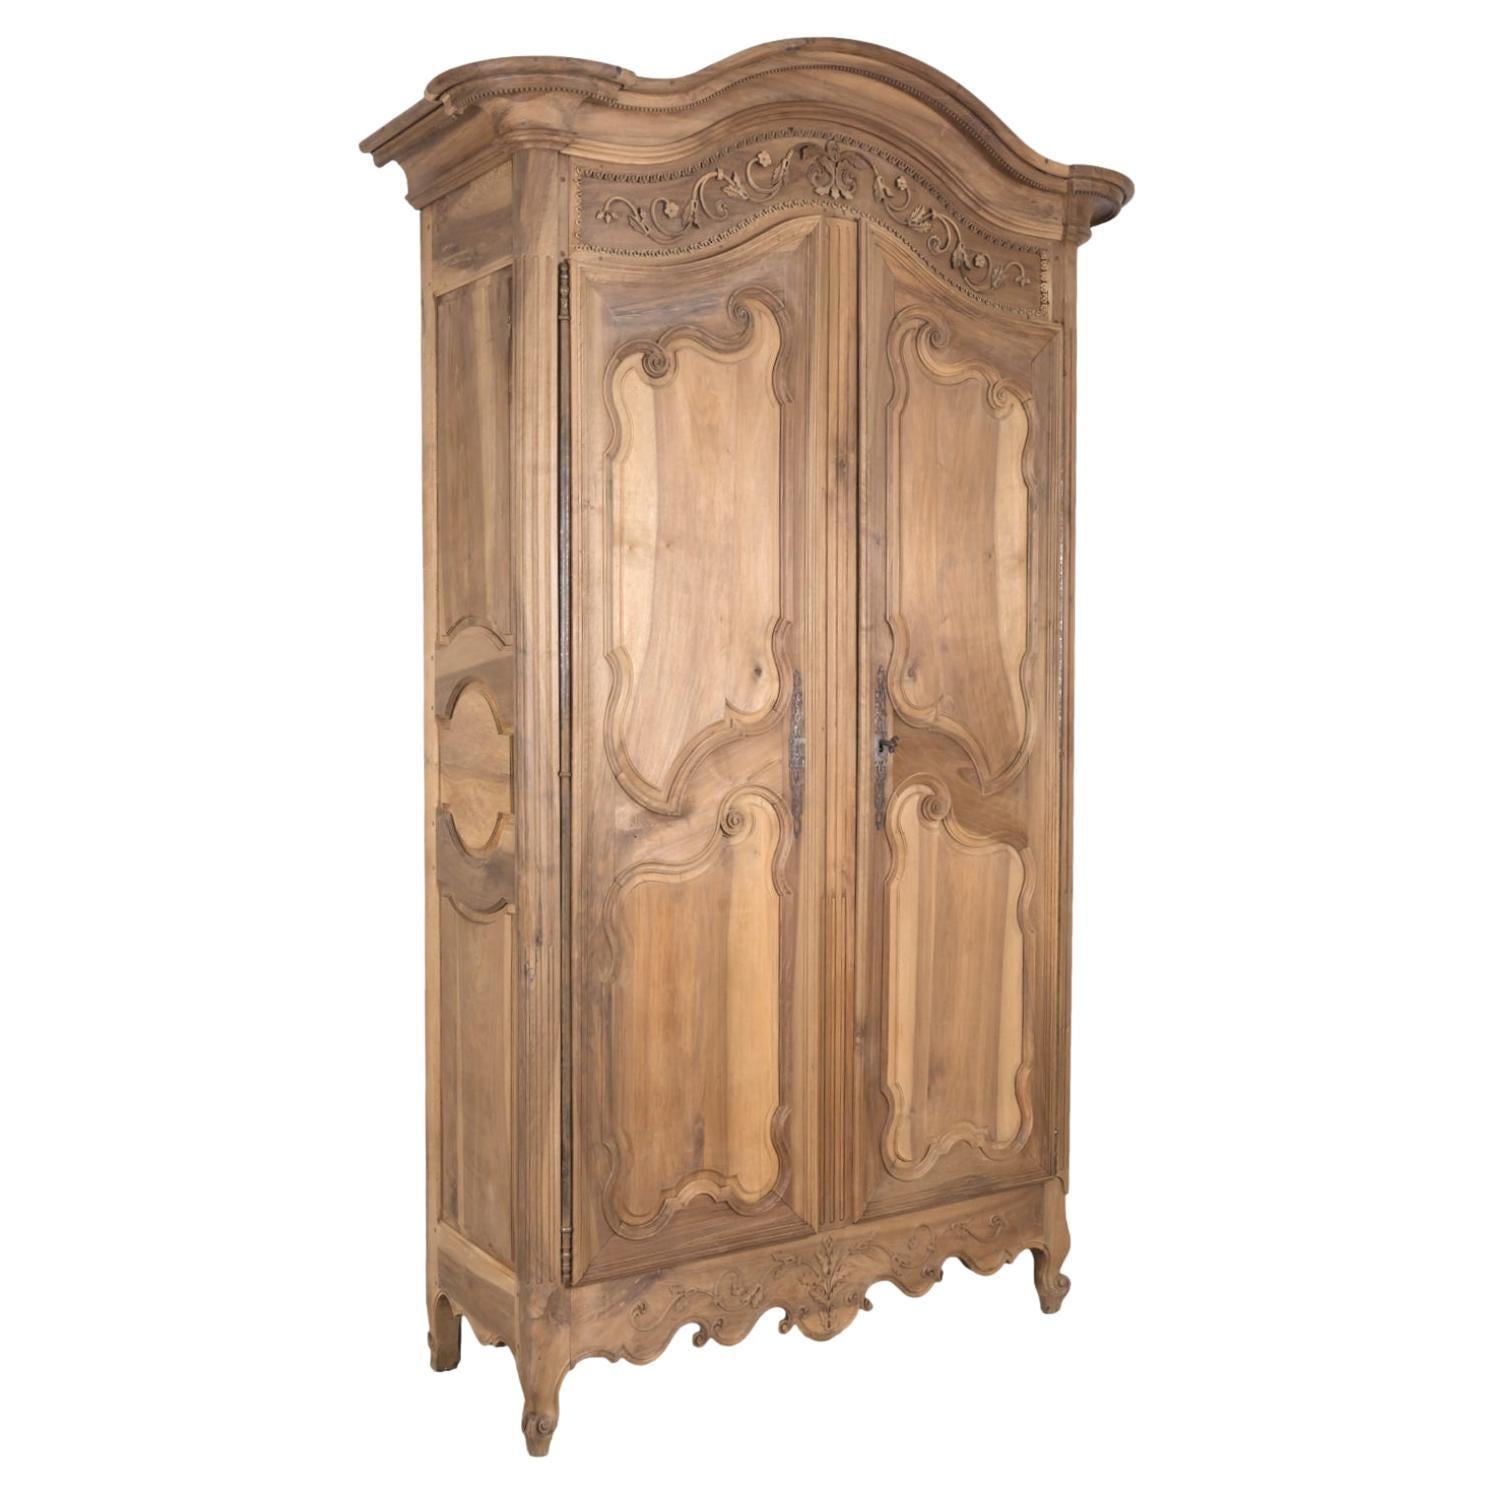 Monumental 18th Century French Louis XV Period Bleached Walnut Lyonnaise Armoire For Sale